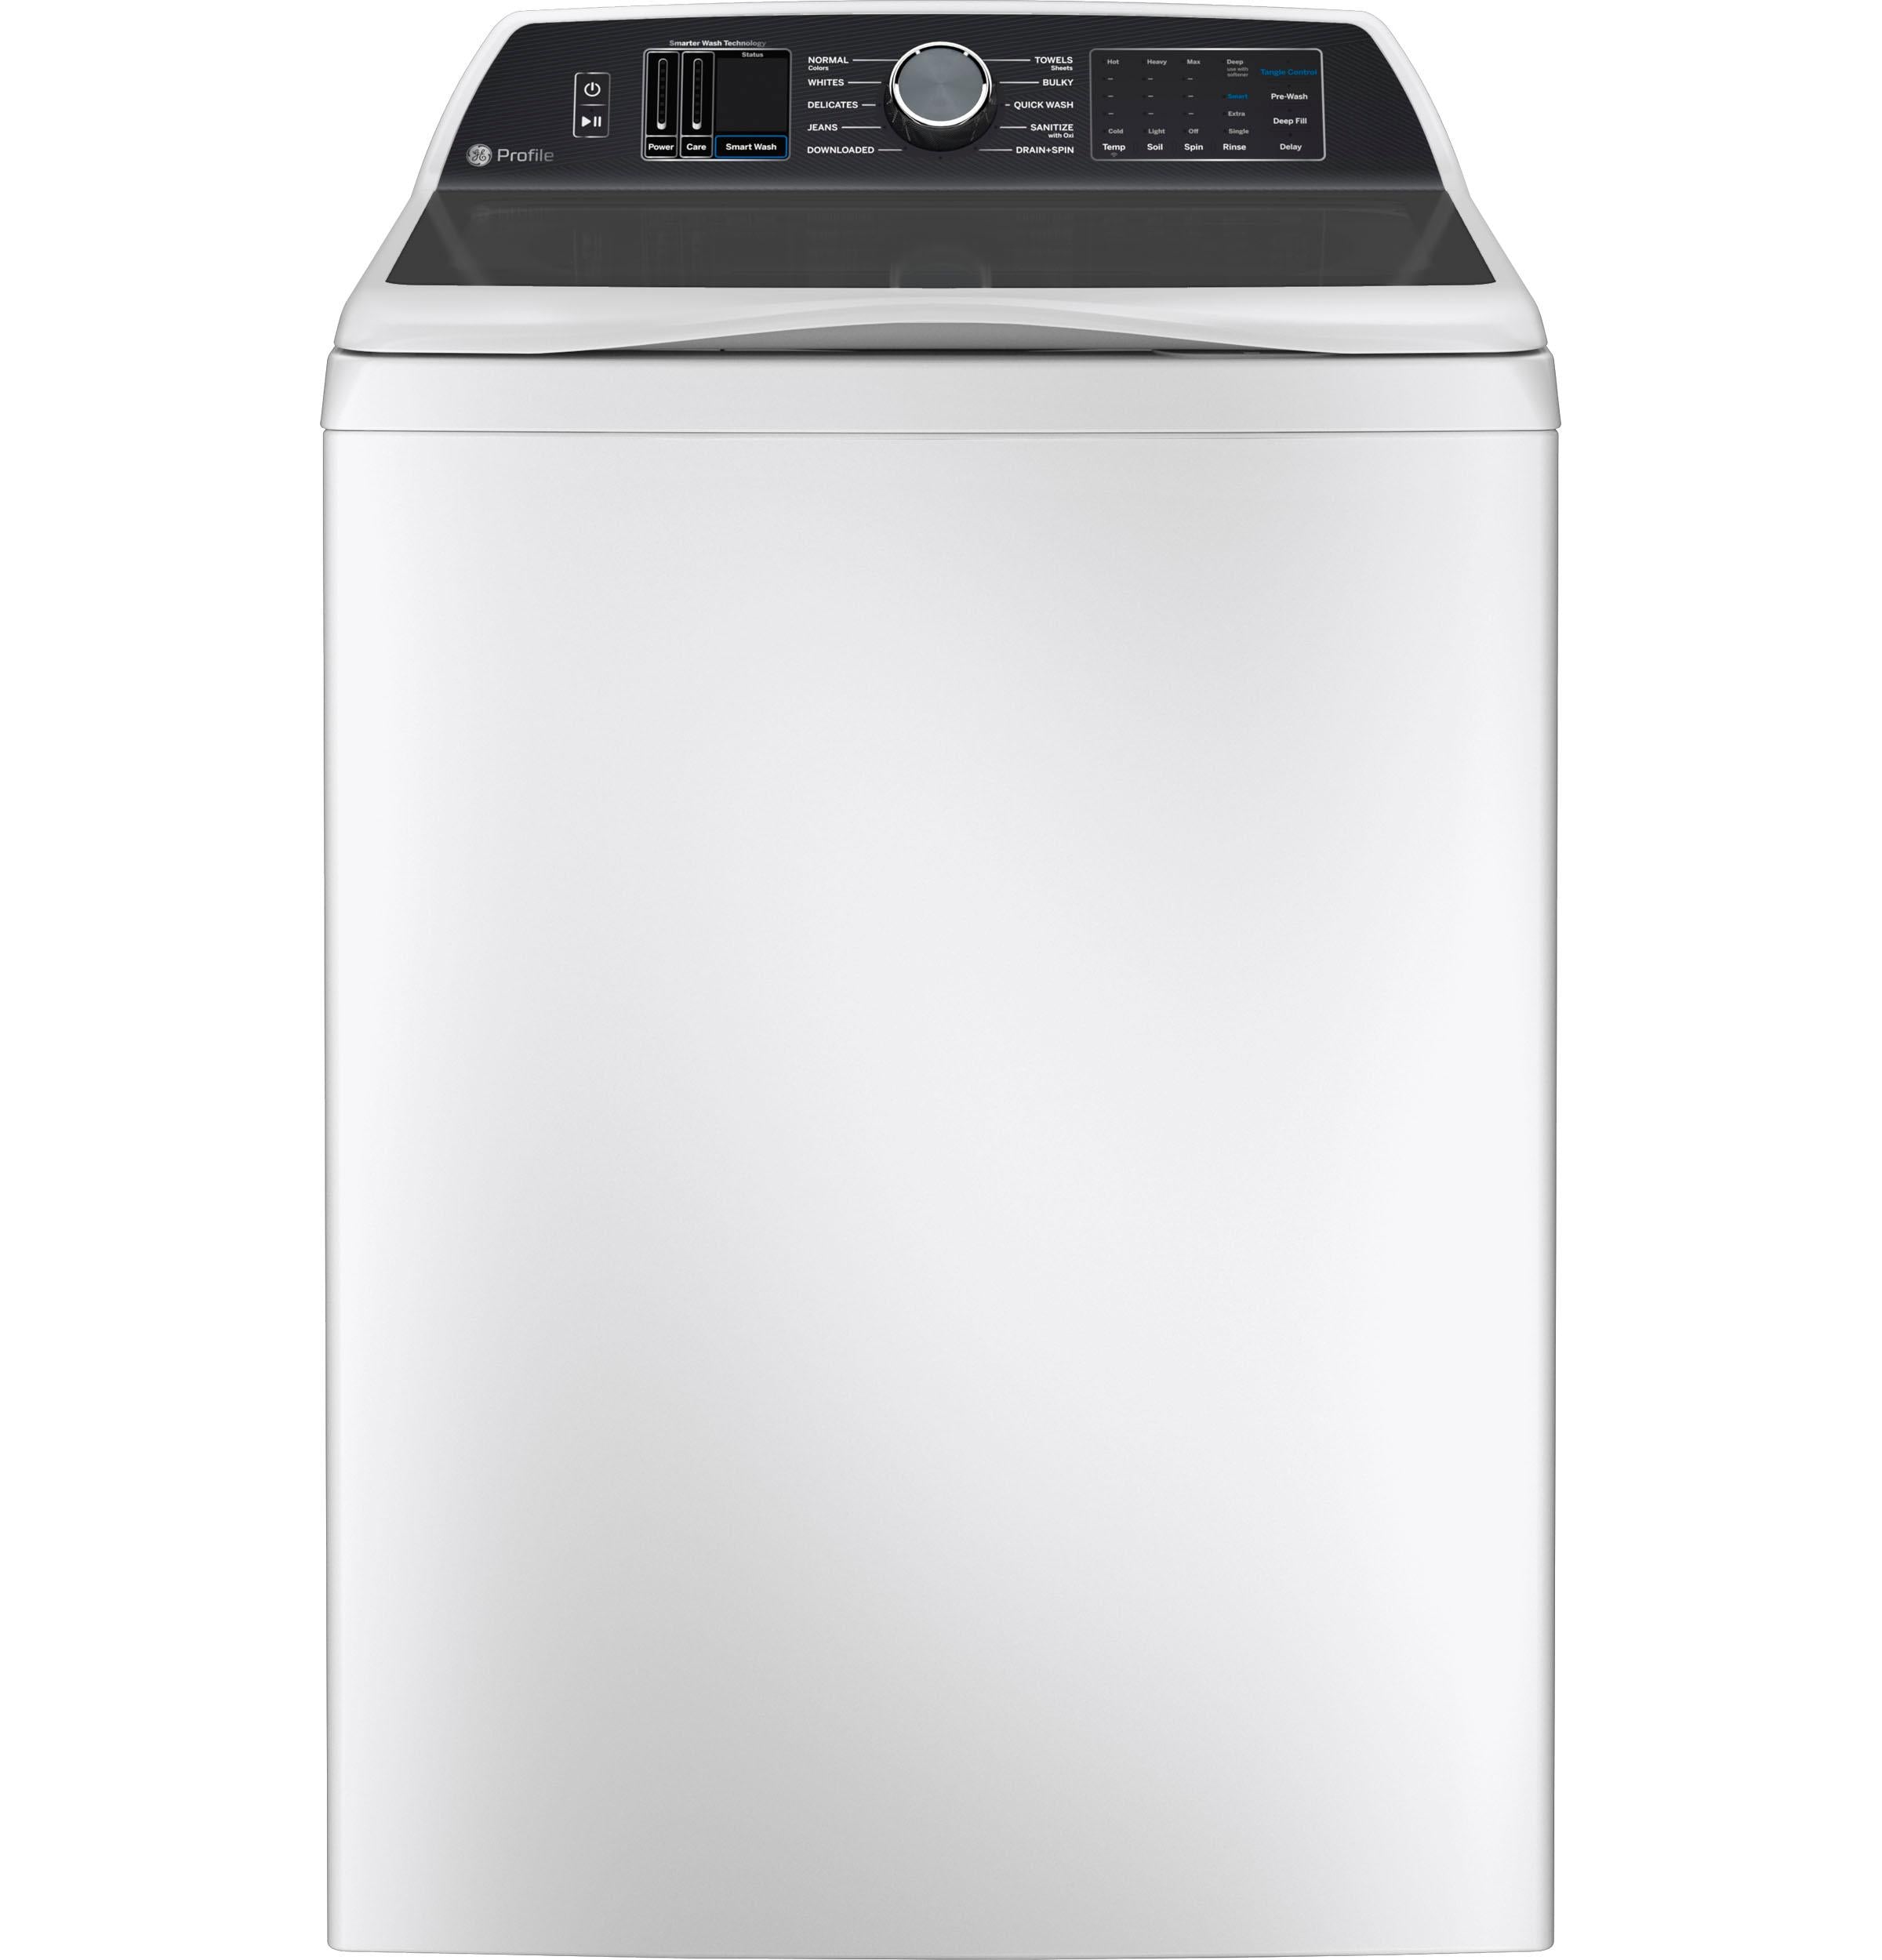 GE Profile™ ENERGY STAR® 5.3 cu. ft. Capacity Washer with Smarter Wash Technology and FlexDispense™